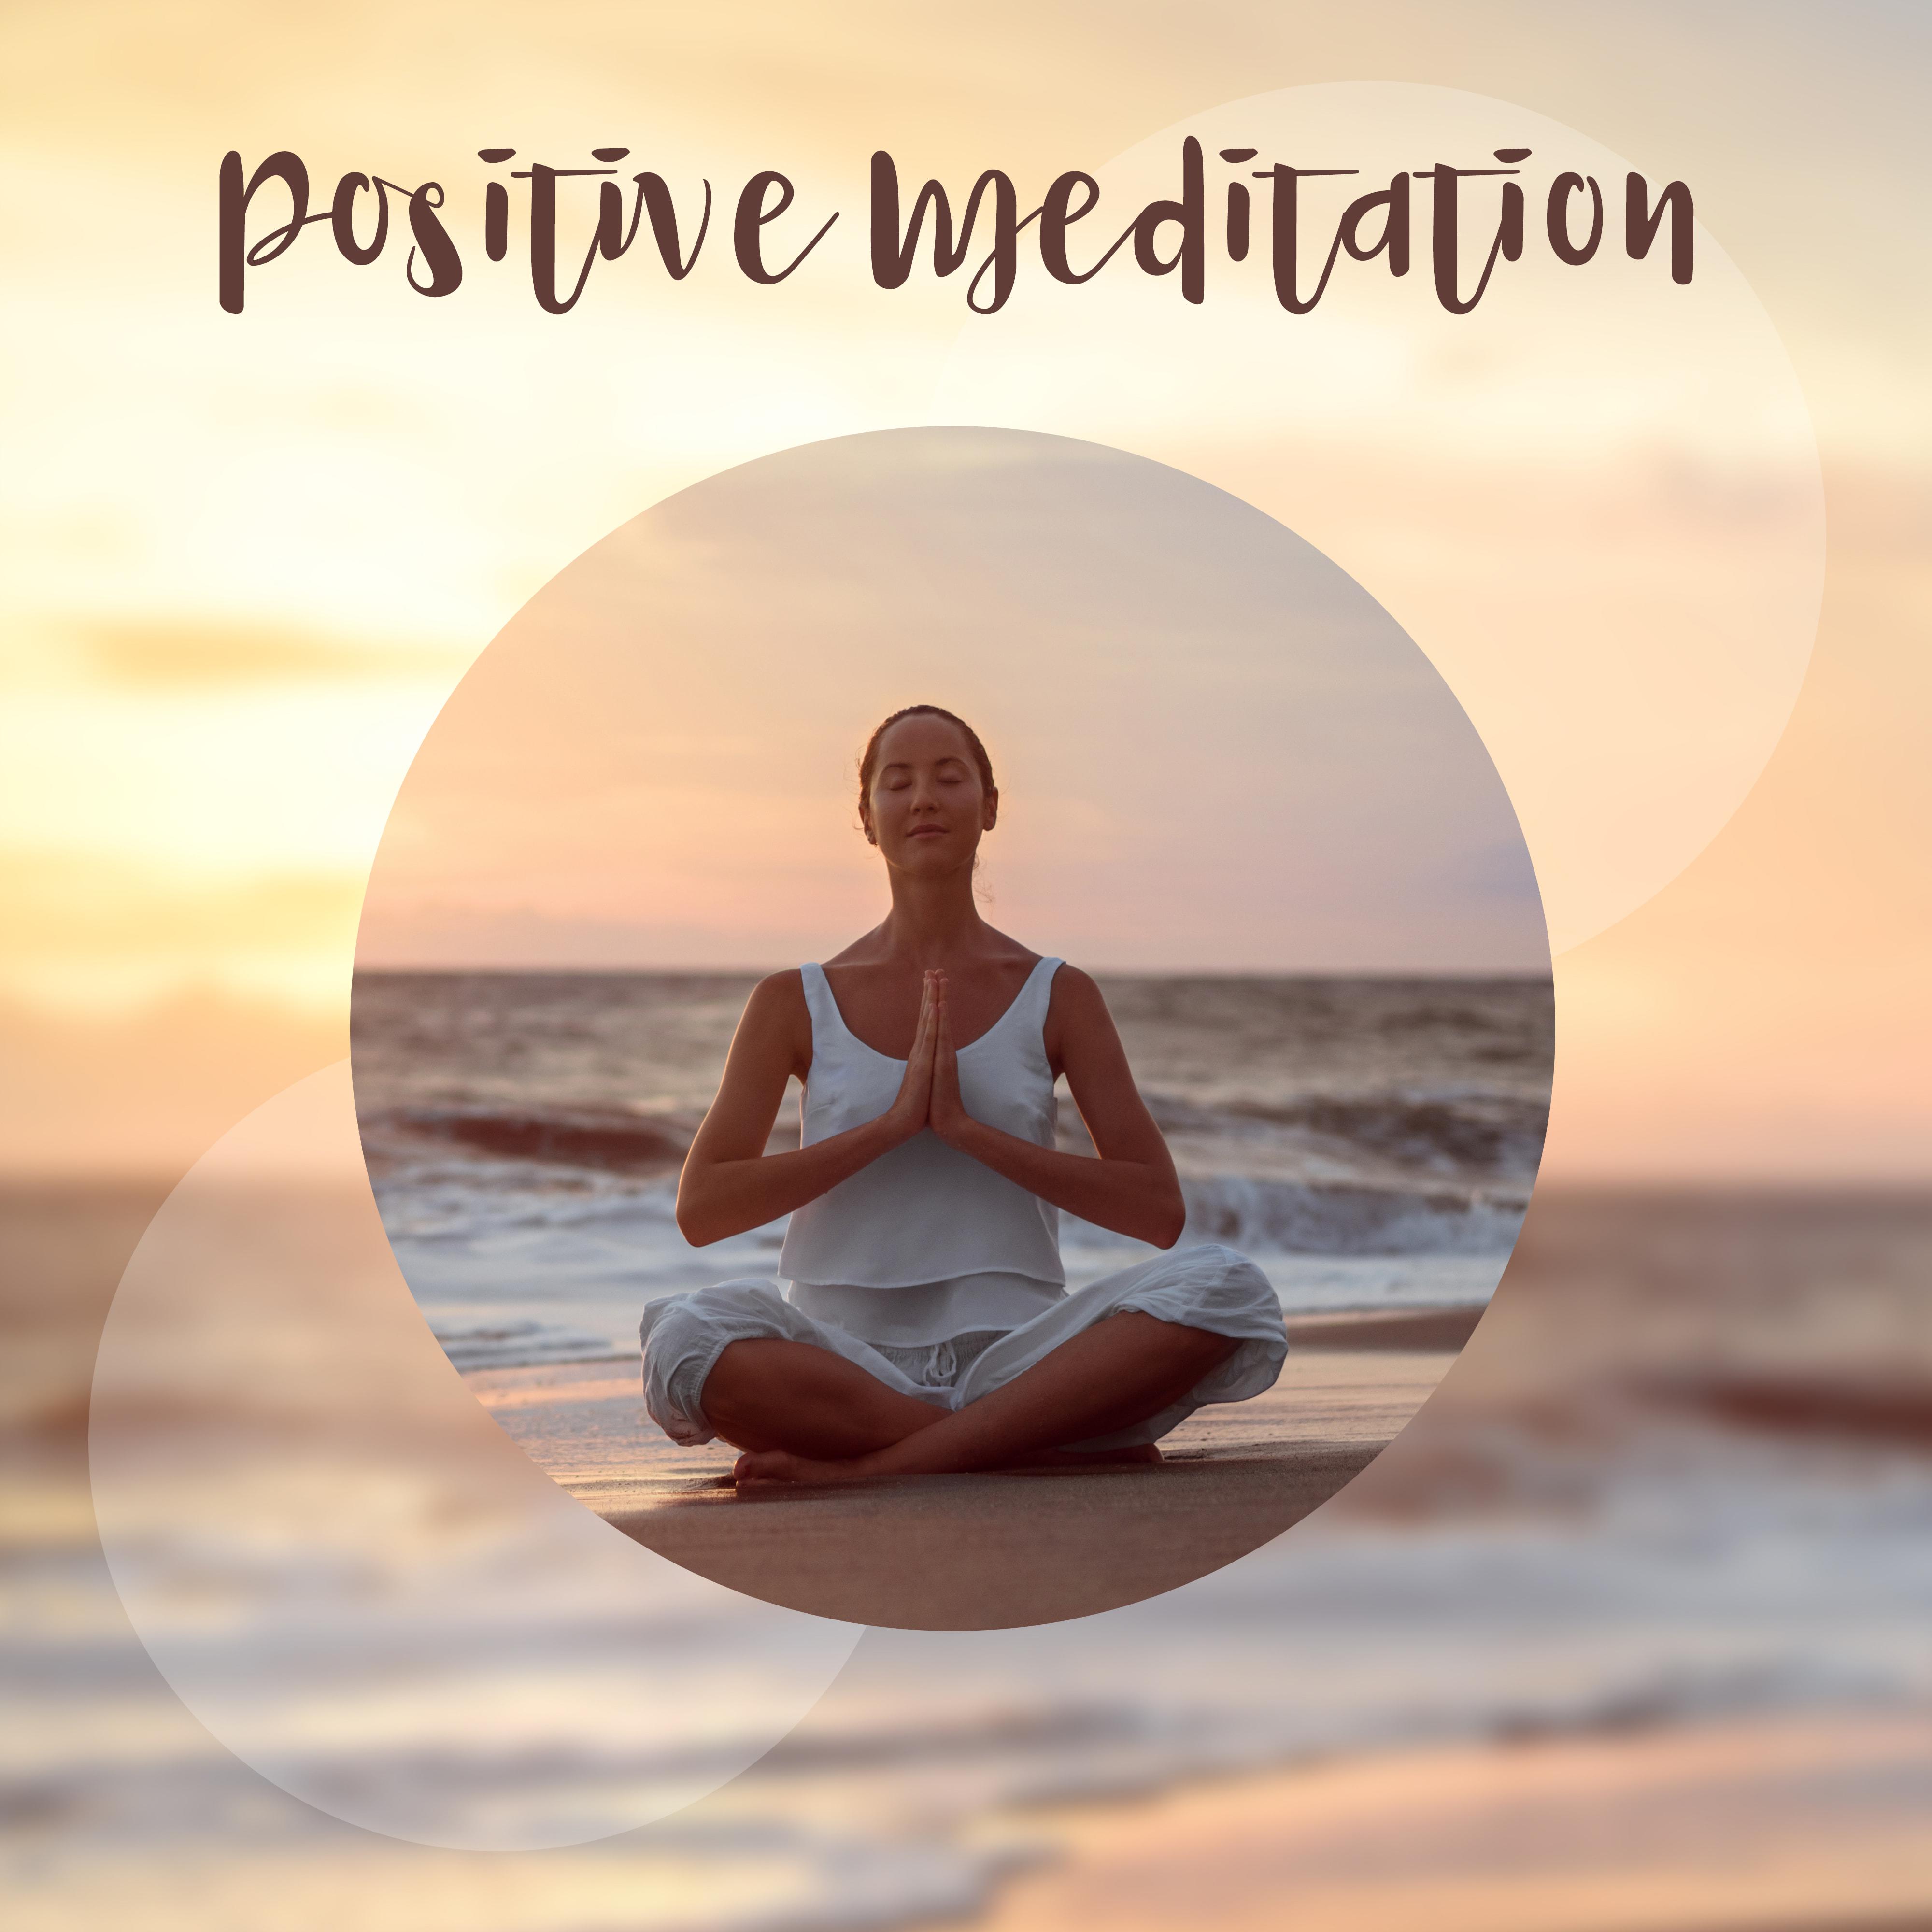 Positive Meditation – Good Thoughts, Good Mood, Energy, Happiness and Inner Harmony